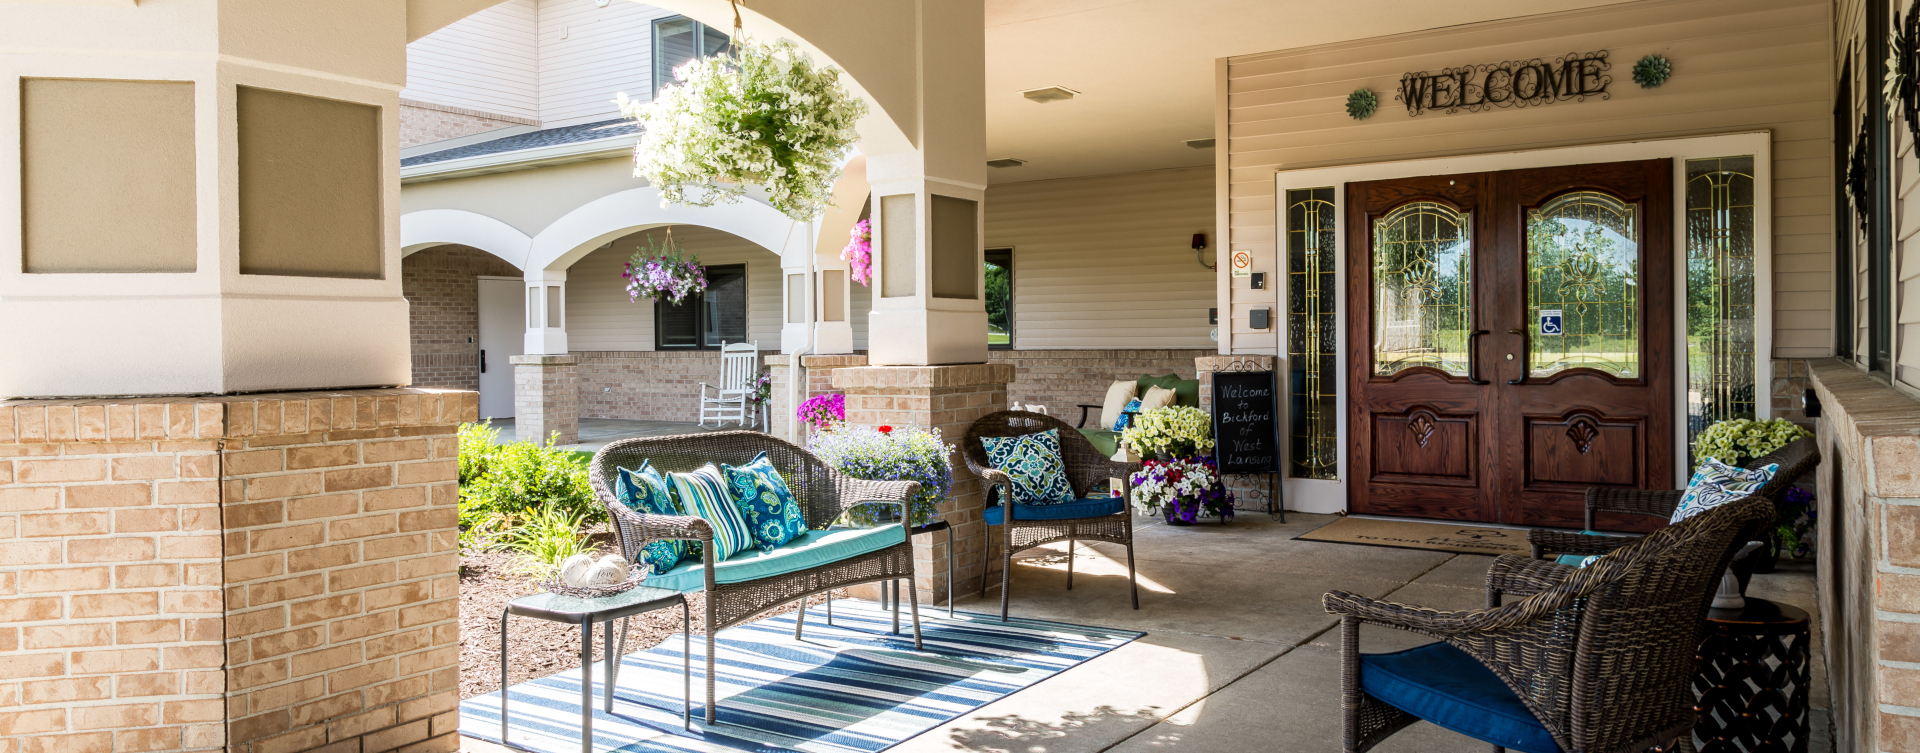 Enjoy conversations with friends on the porch at Bickford of West Lansing